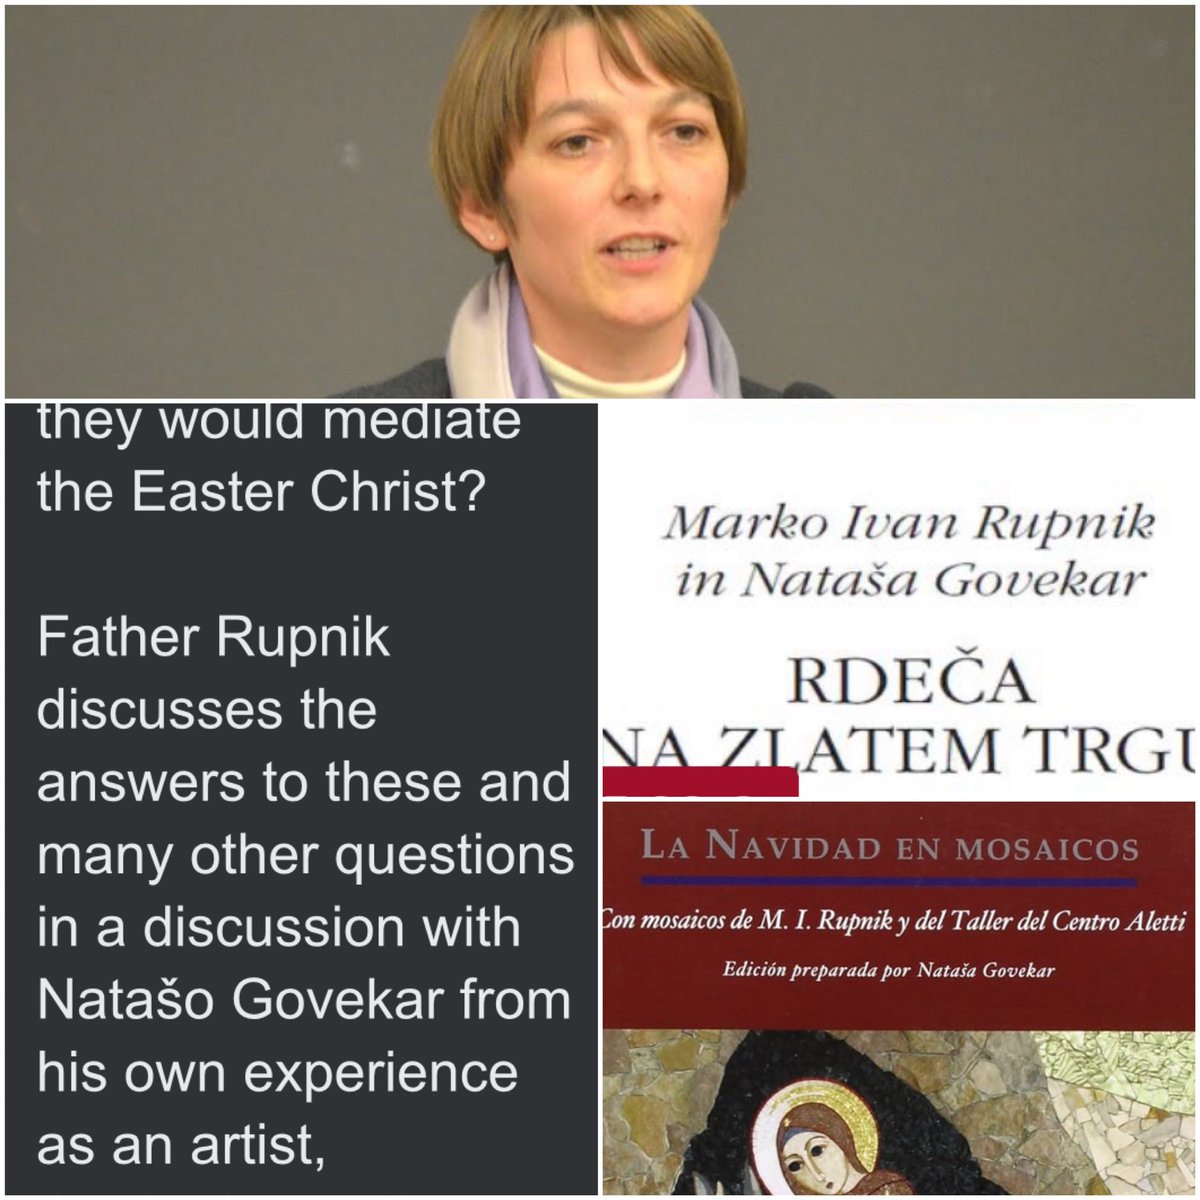 How many members of the Vatican press corps knew that Francis was still employing #Rupnik propagandist Natasa Govekar in Vatican communications? Most of them, I suspect. They knew why @VaticanNews was pushing out his evil images and said nothing.